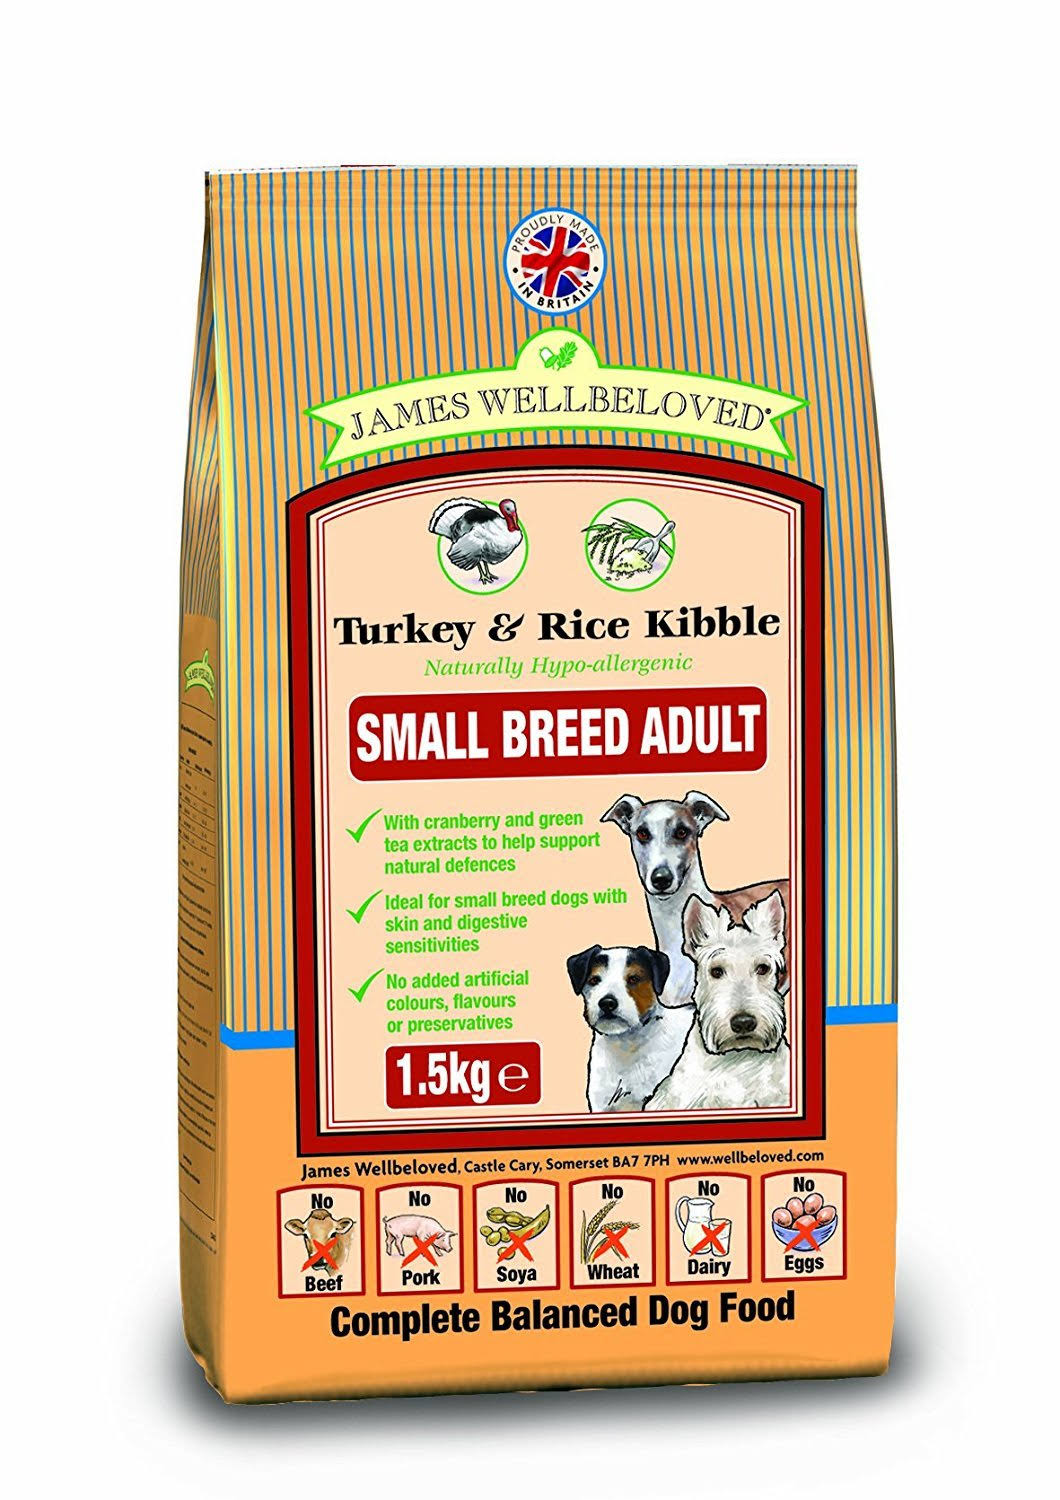 James Wellbeloved Small Breed Turkey and Rice Dog Food - 7.5kg